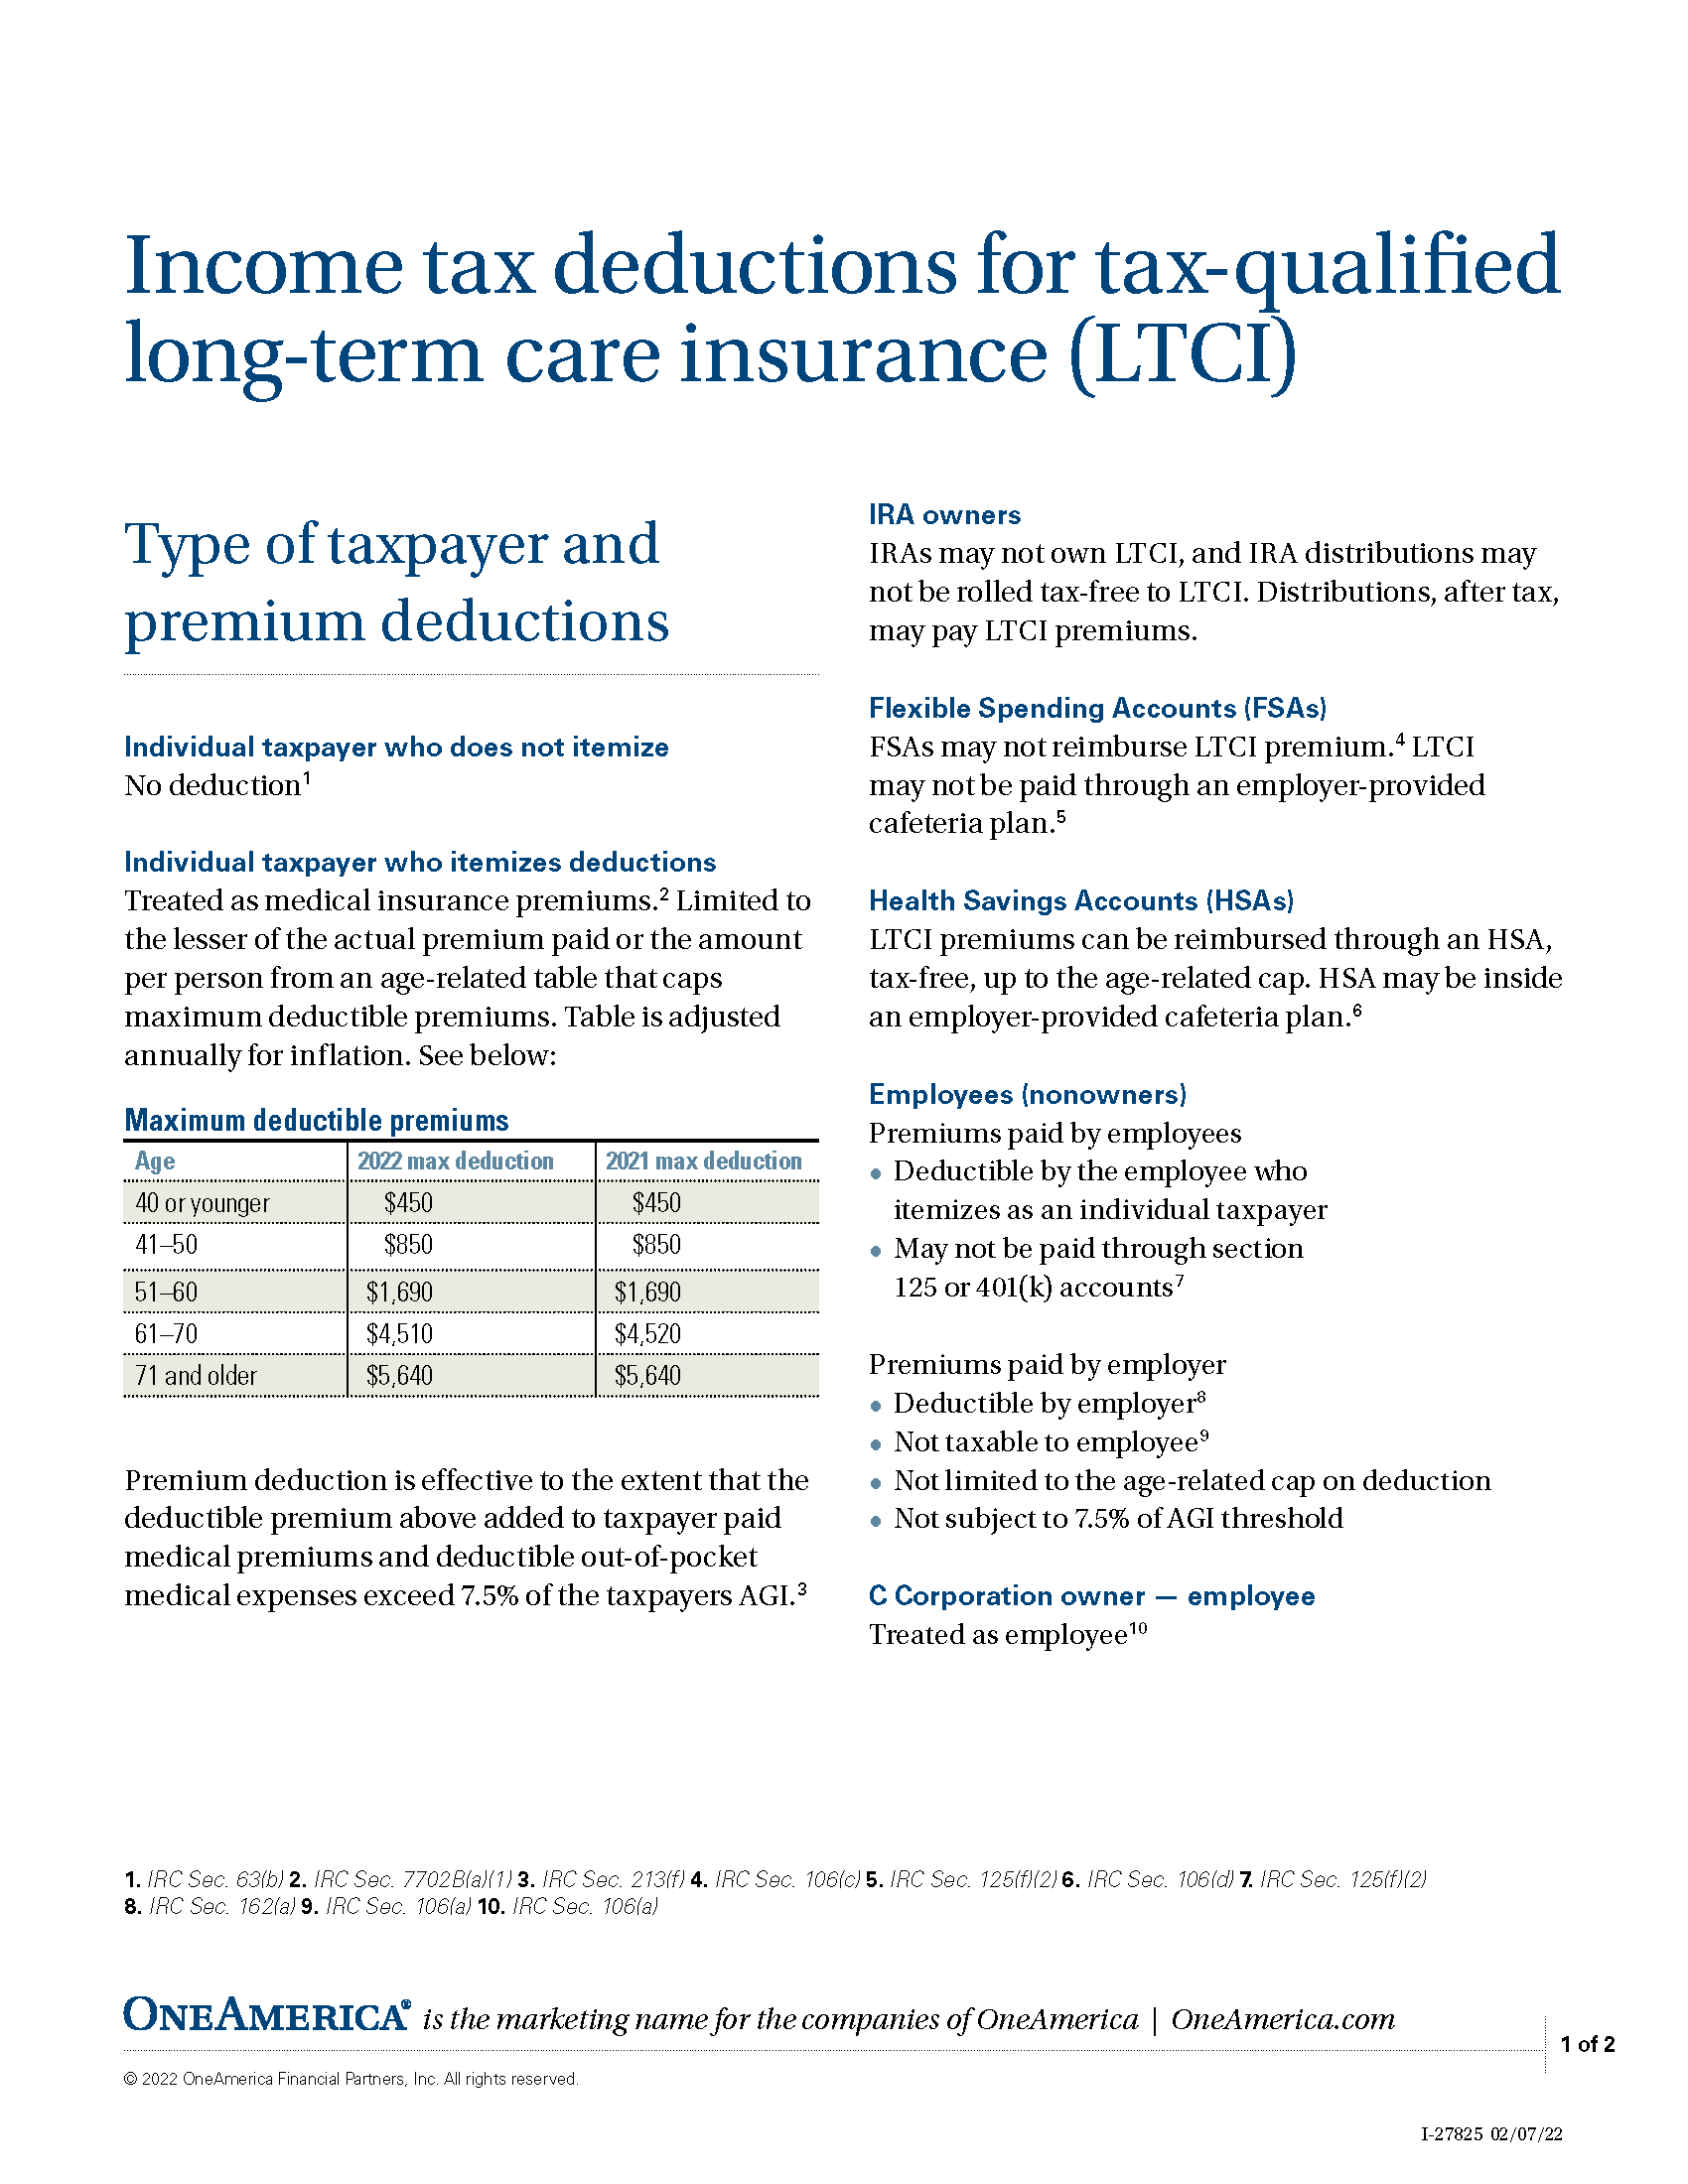 Income Tax Deductions for Tax-Qualified LTCi